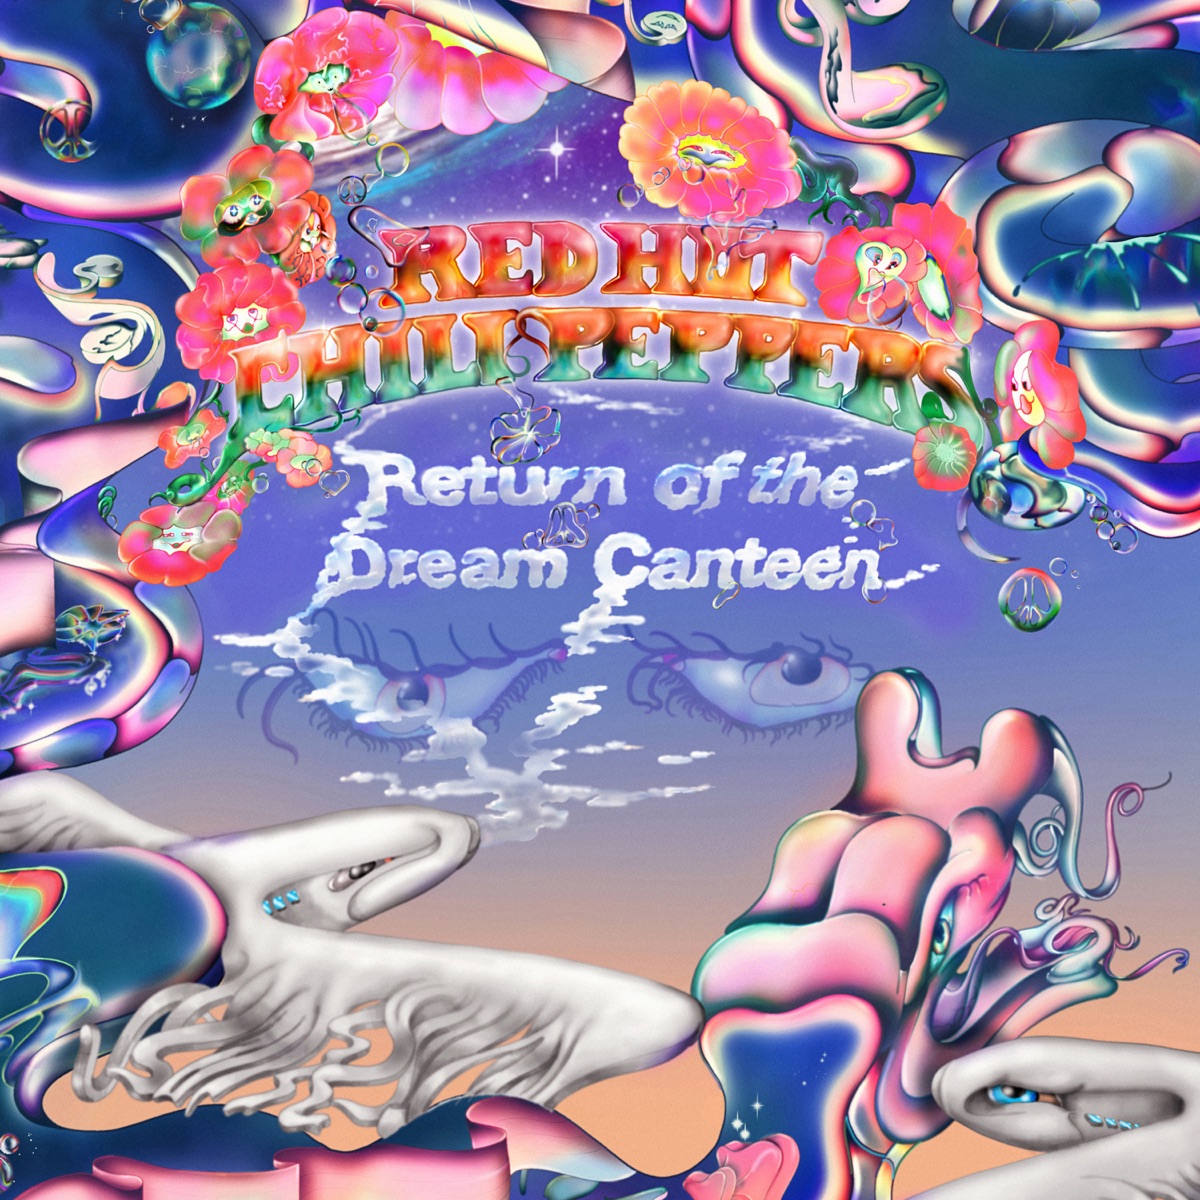 Return of the Dream Canteen - Album by Red Hot Chili Peppers - Apple Music